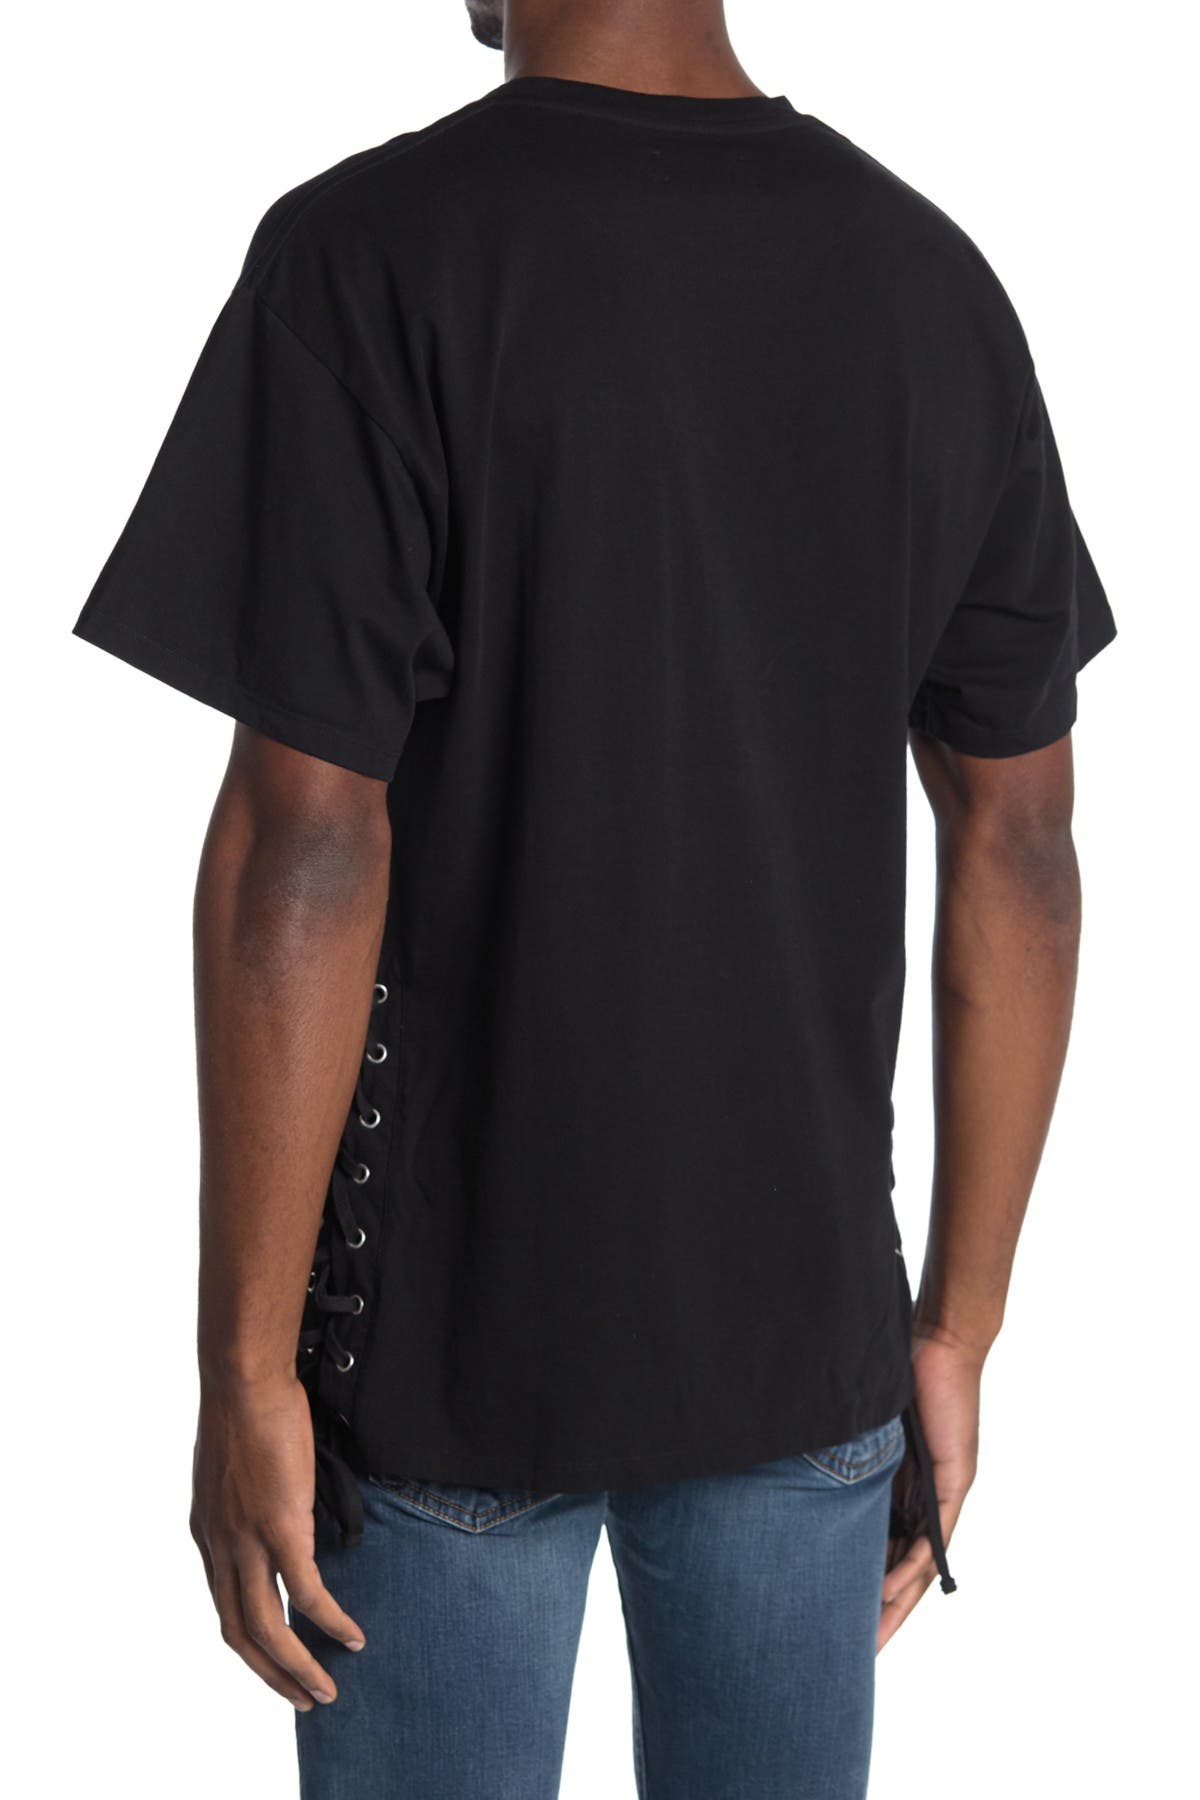 Faith Connexion Box Side Lace-up T-shirt In Black